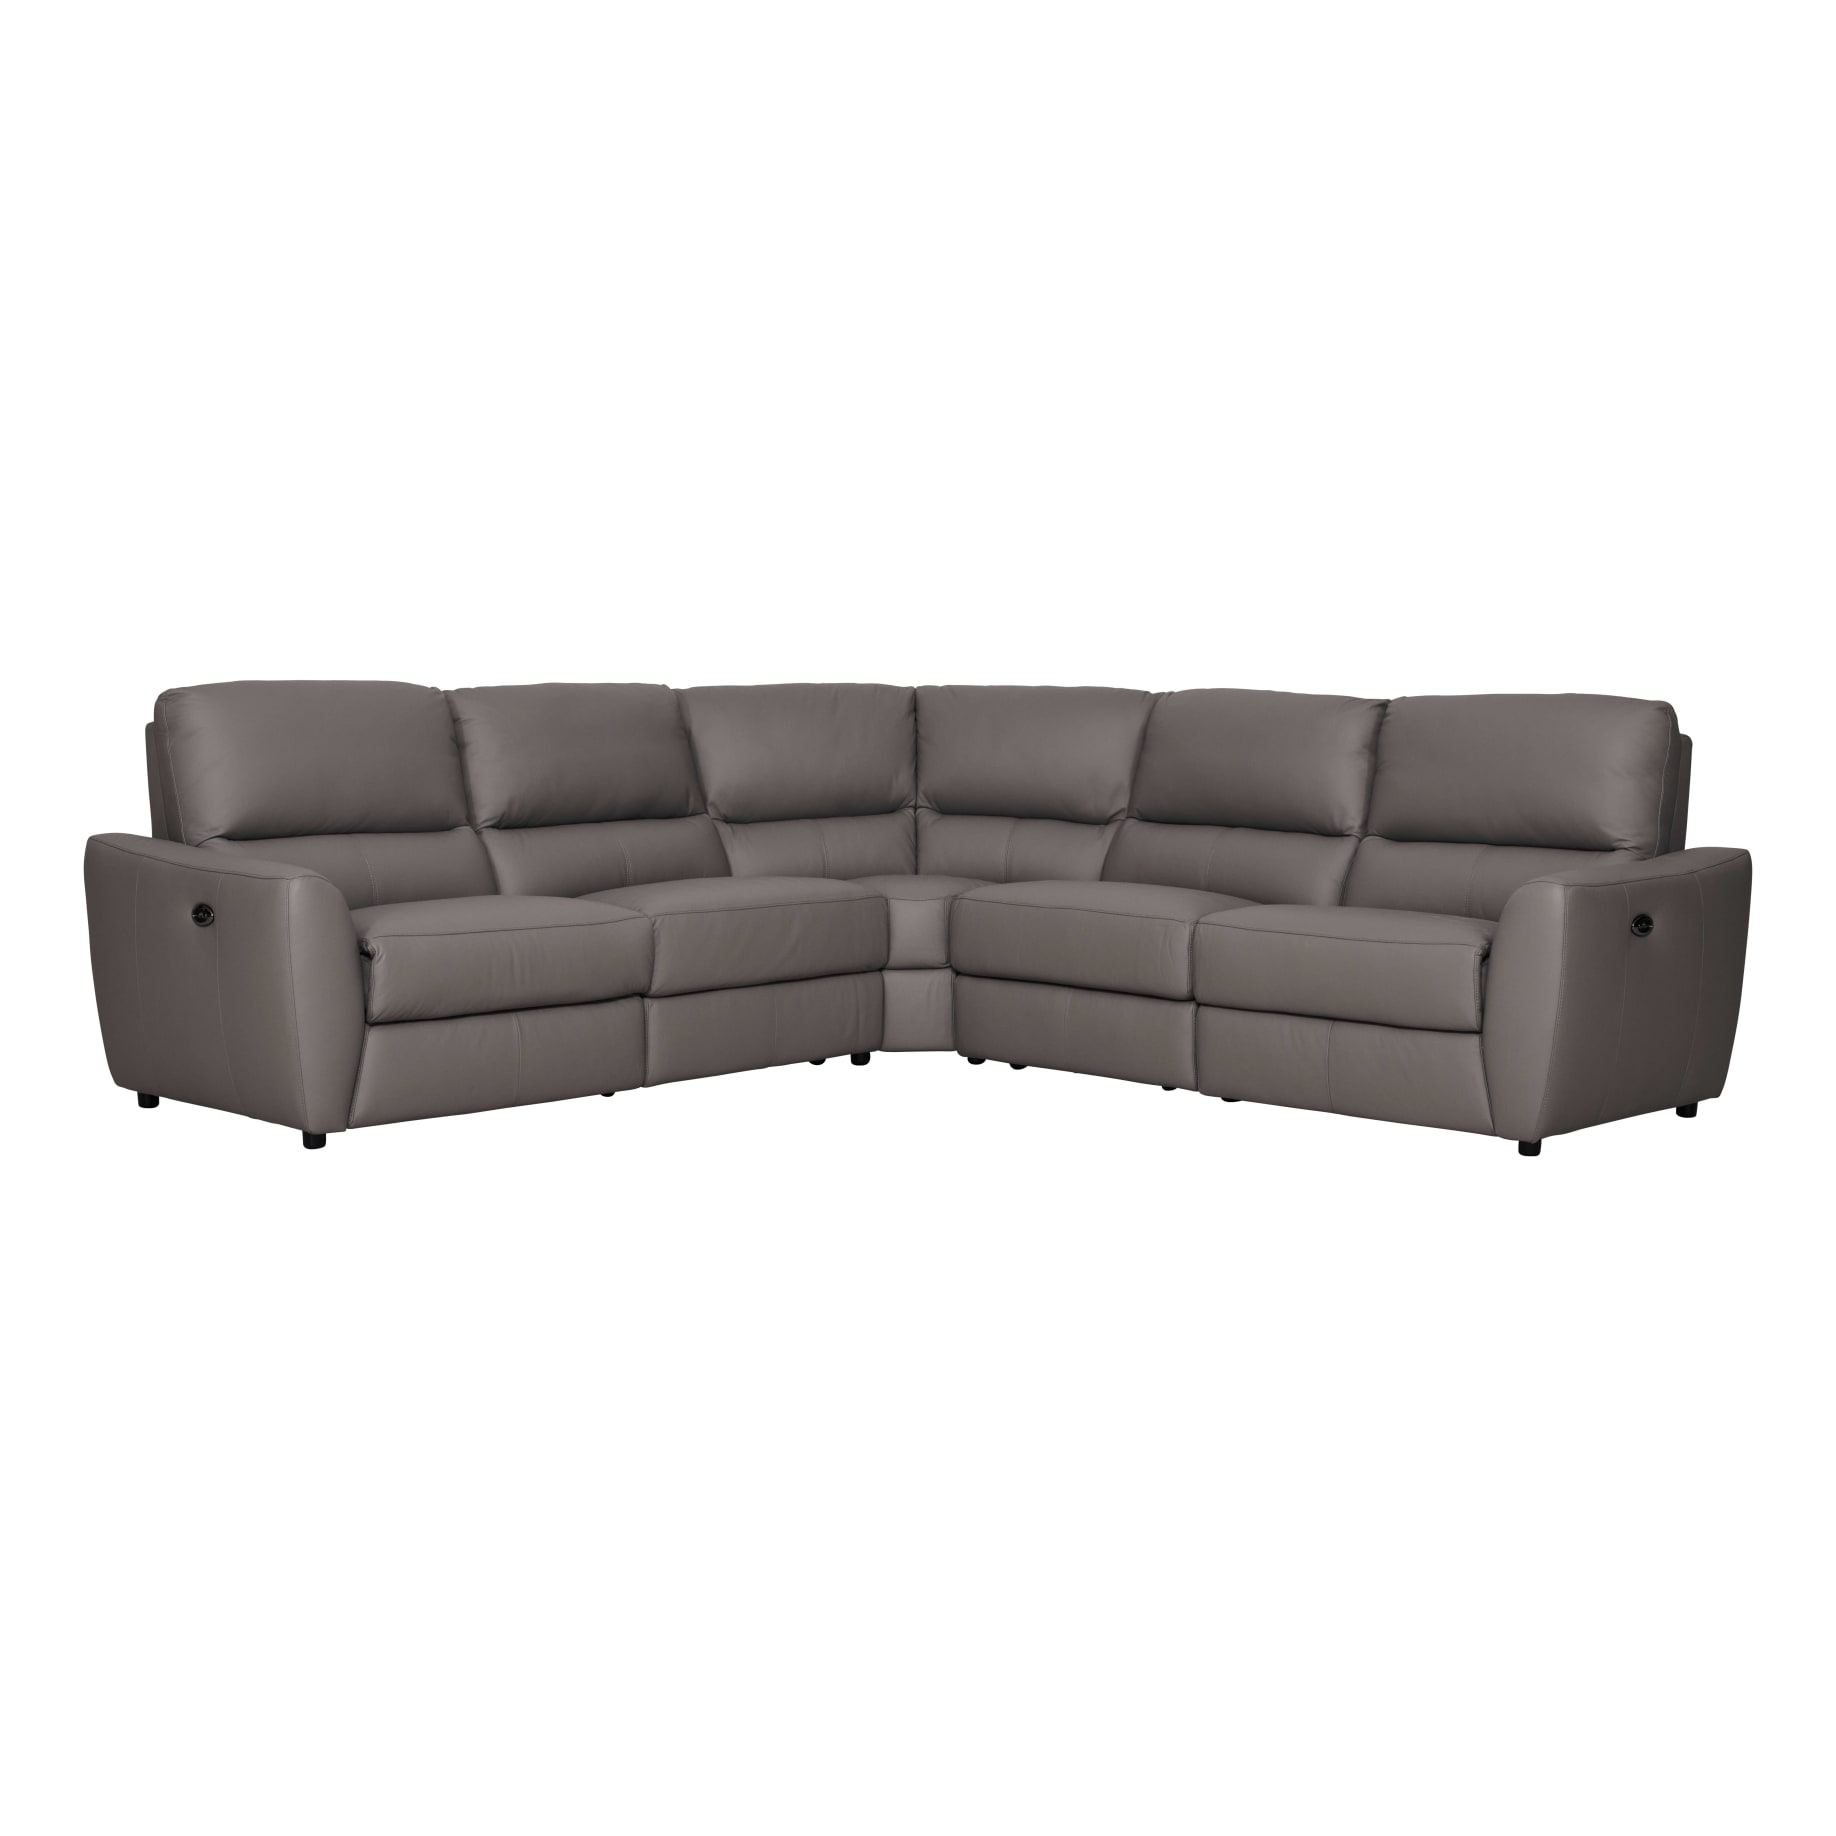 Portland Modular Sofa with 2 Recliners in Leather Grey